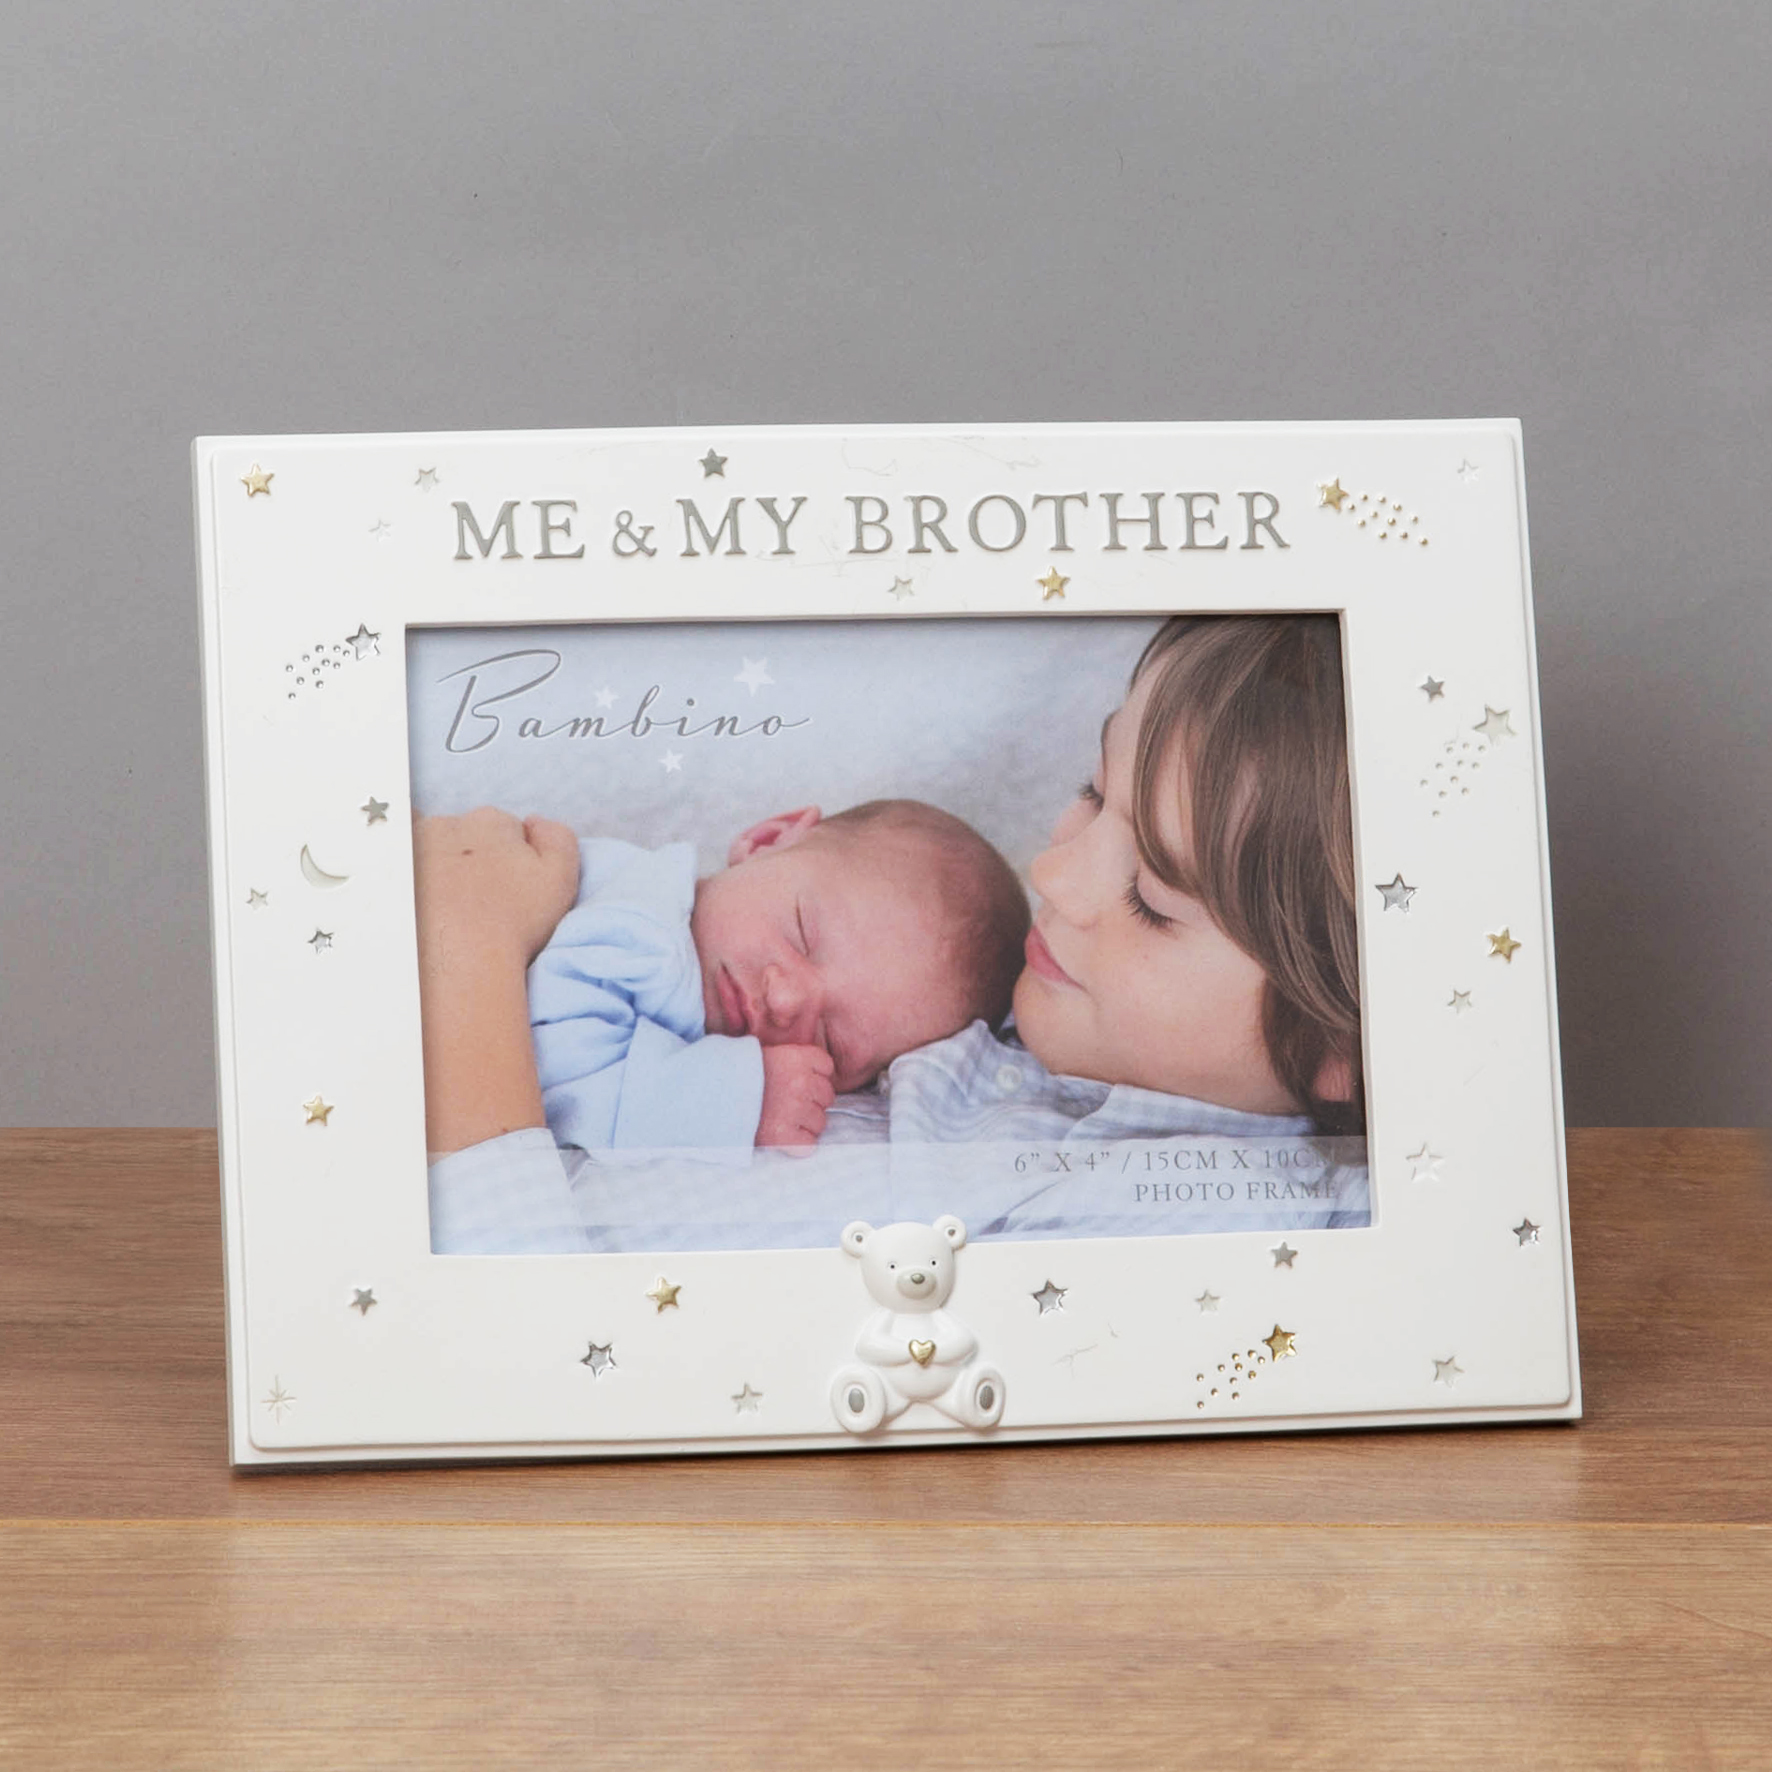 The Gift Experience 6 x 4 Bambino Resin Mummy & Me Photo Frame 